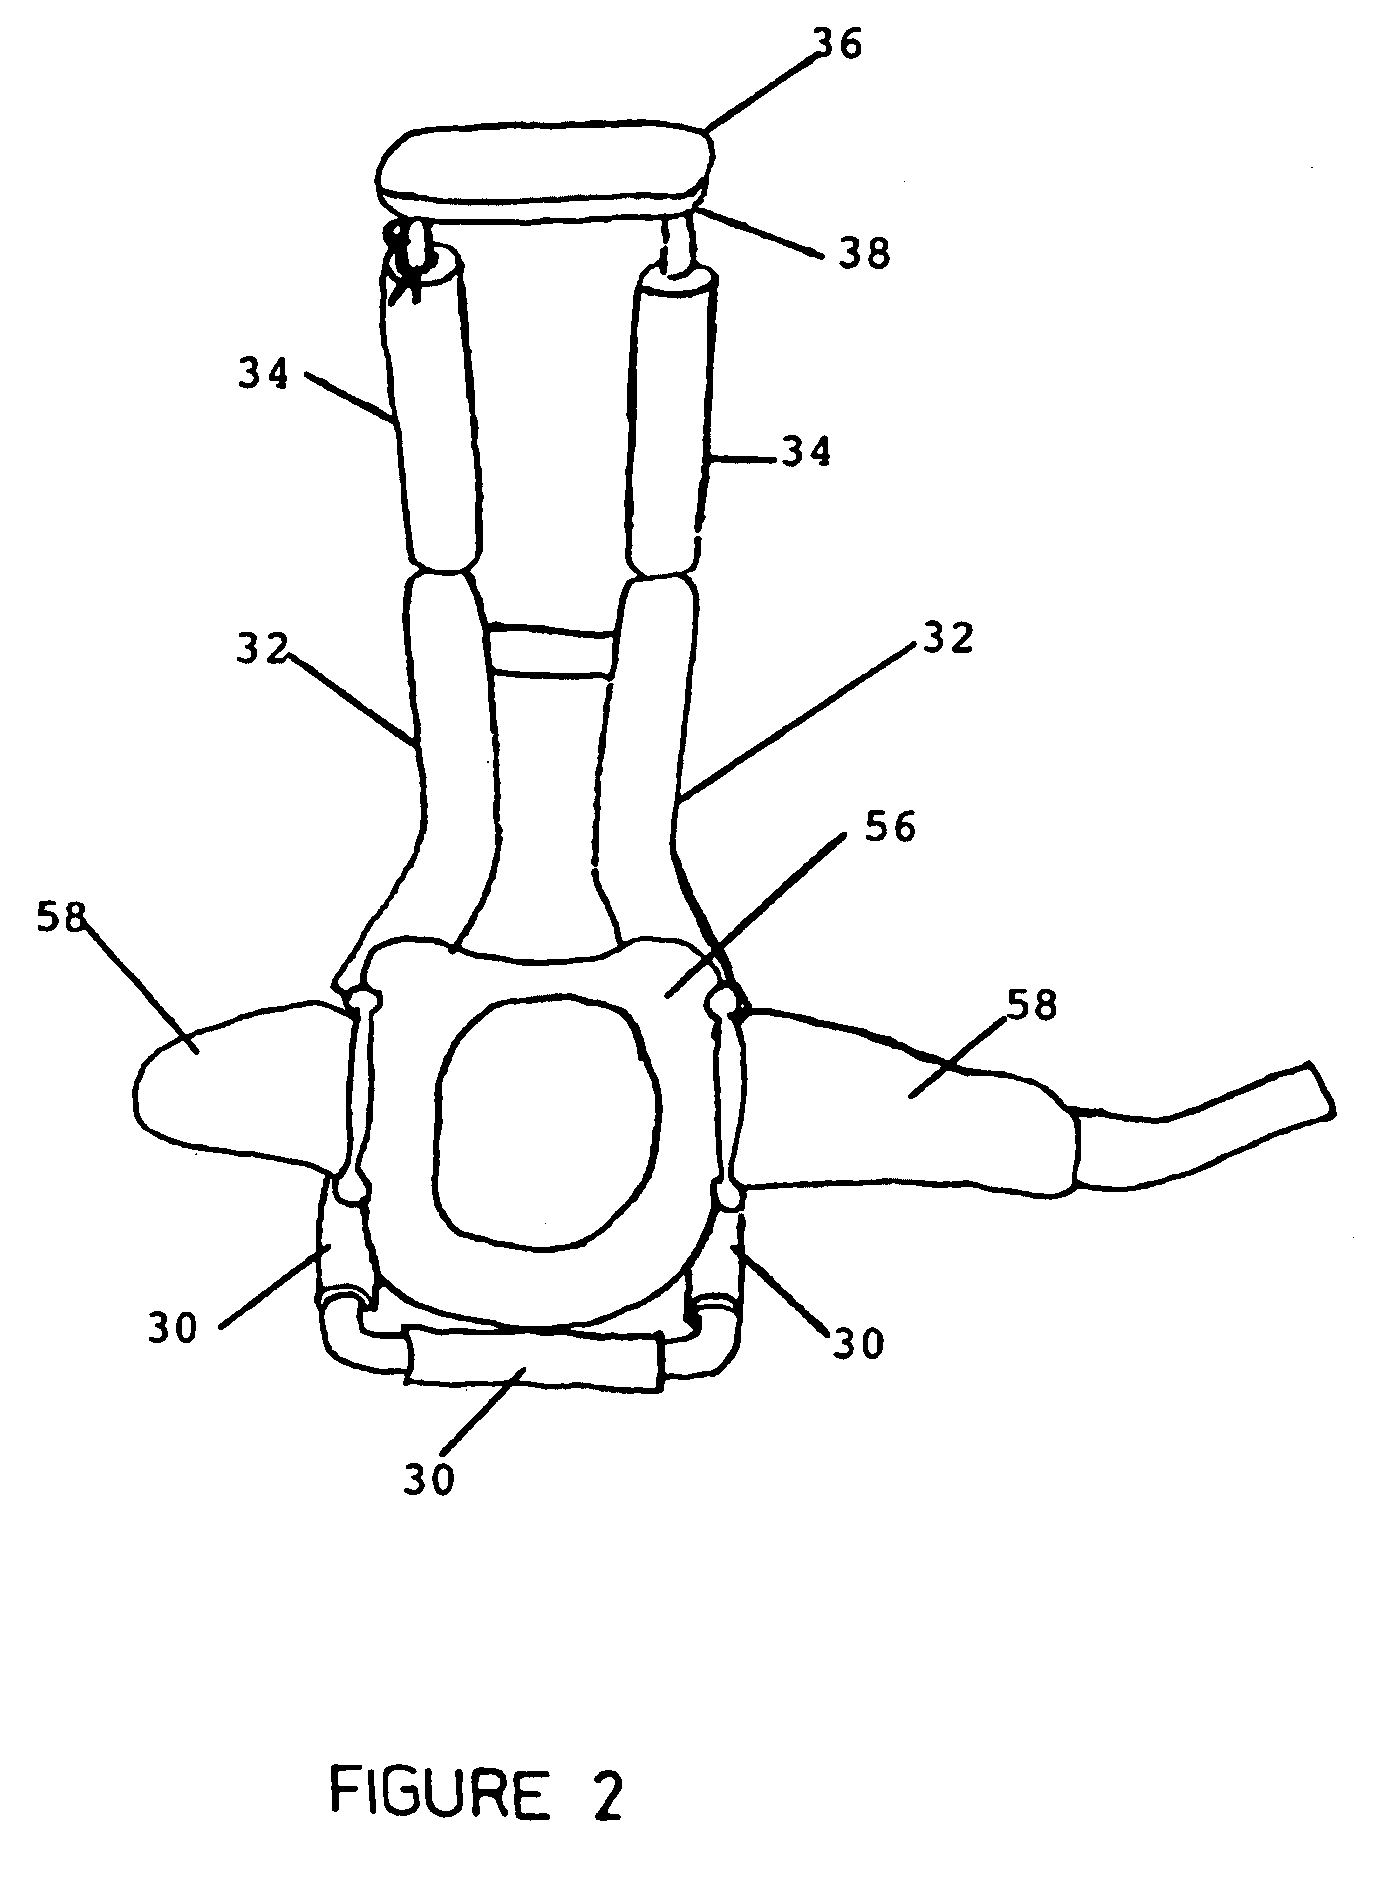 Lower body support device